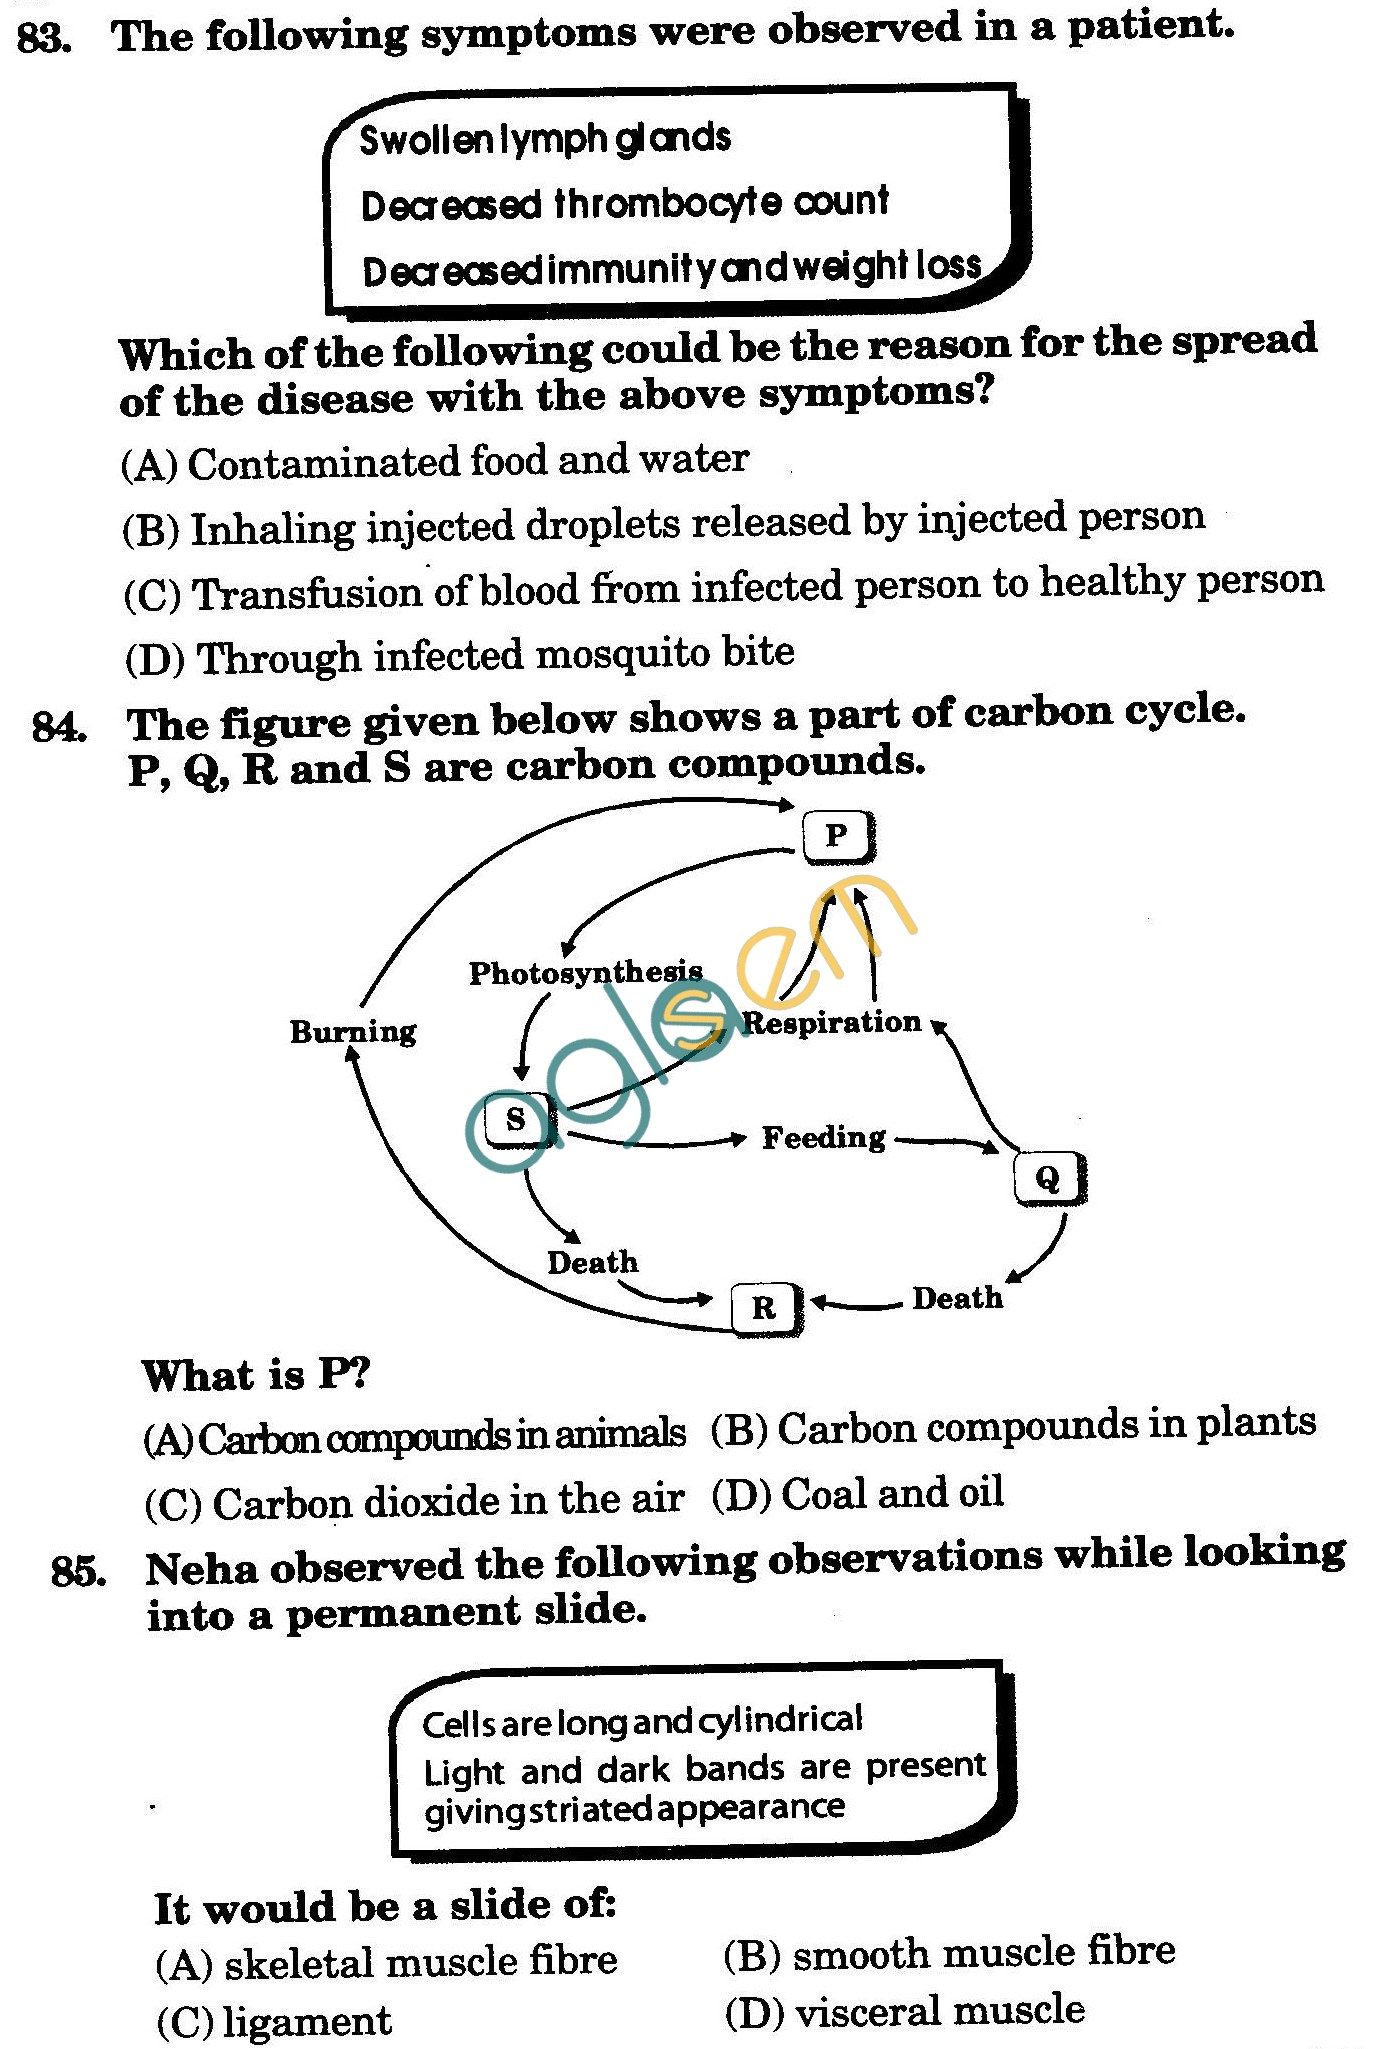 NSTSE 2010: Class IX Question Paper with Answers - Biology